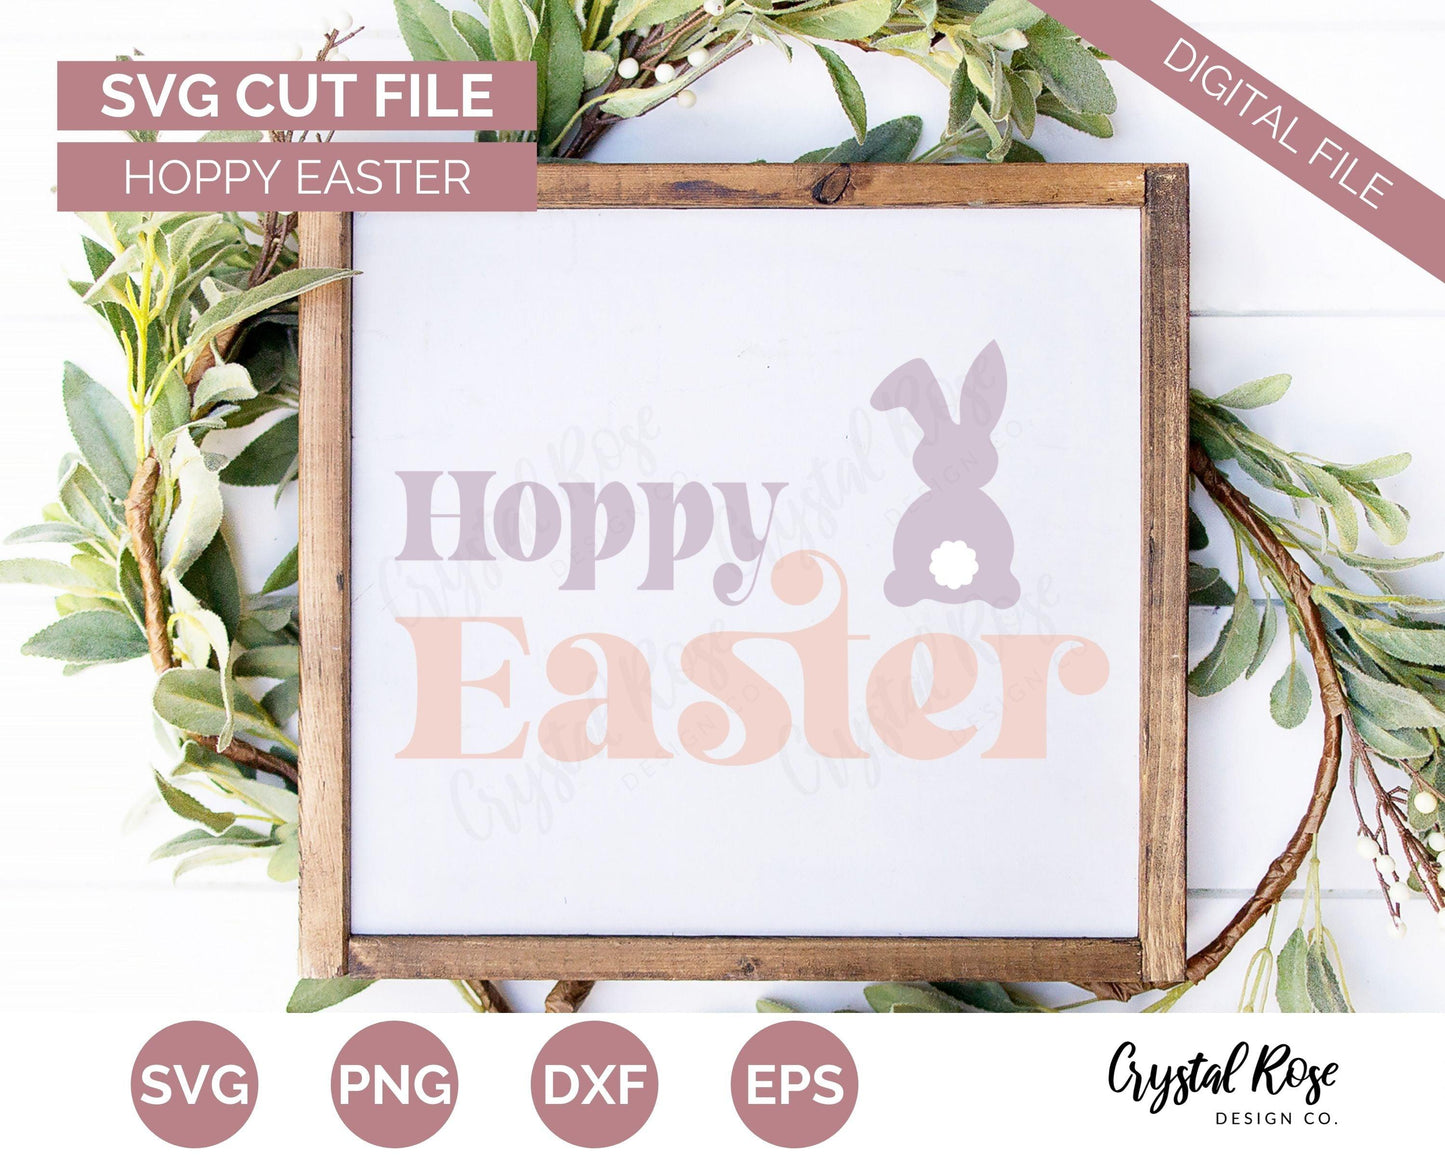 Hoppy Easter SVG, Easter SVG, Digital Download, Cricut, Silhouette, Glowforge (includes svg/png/dxf/eps)